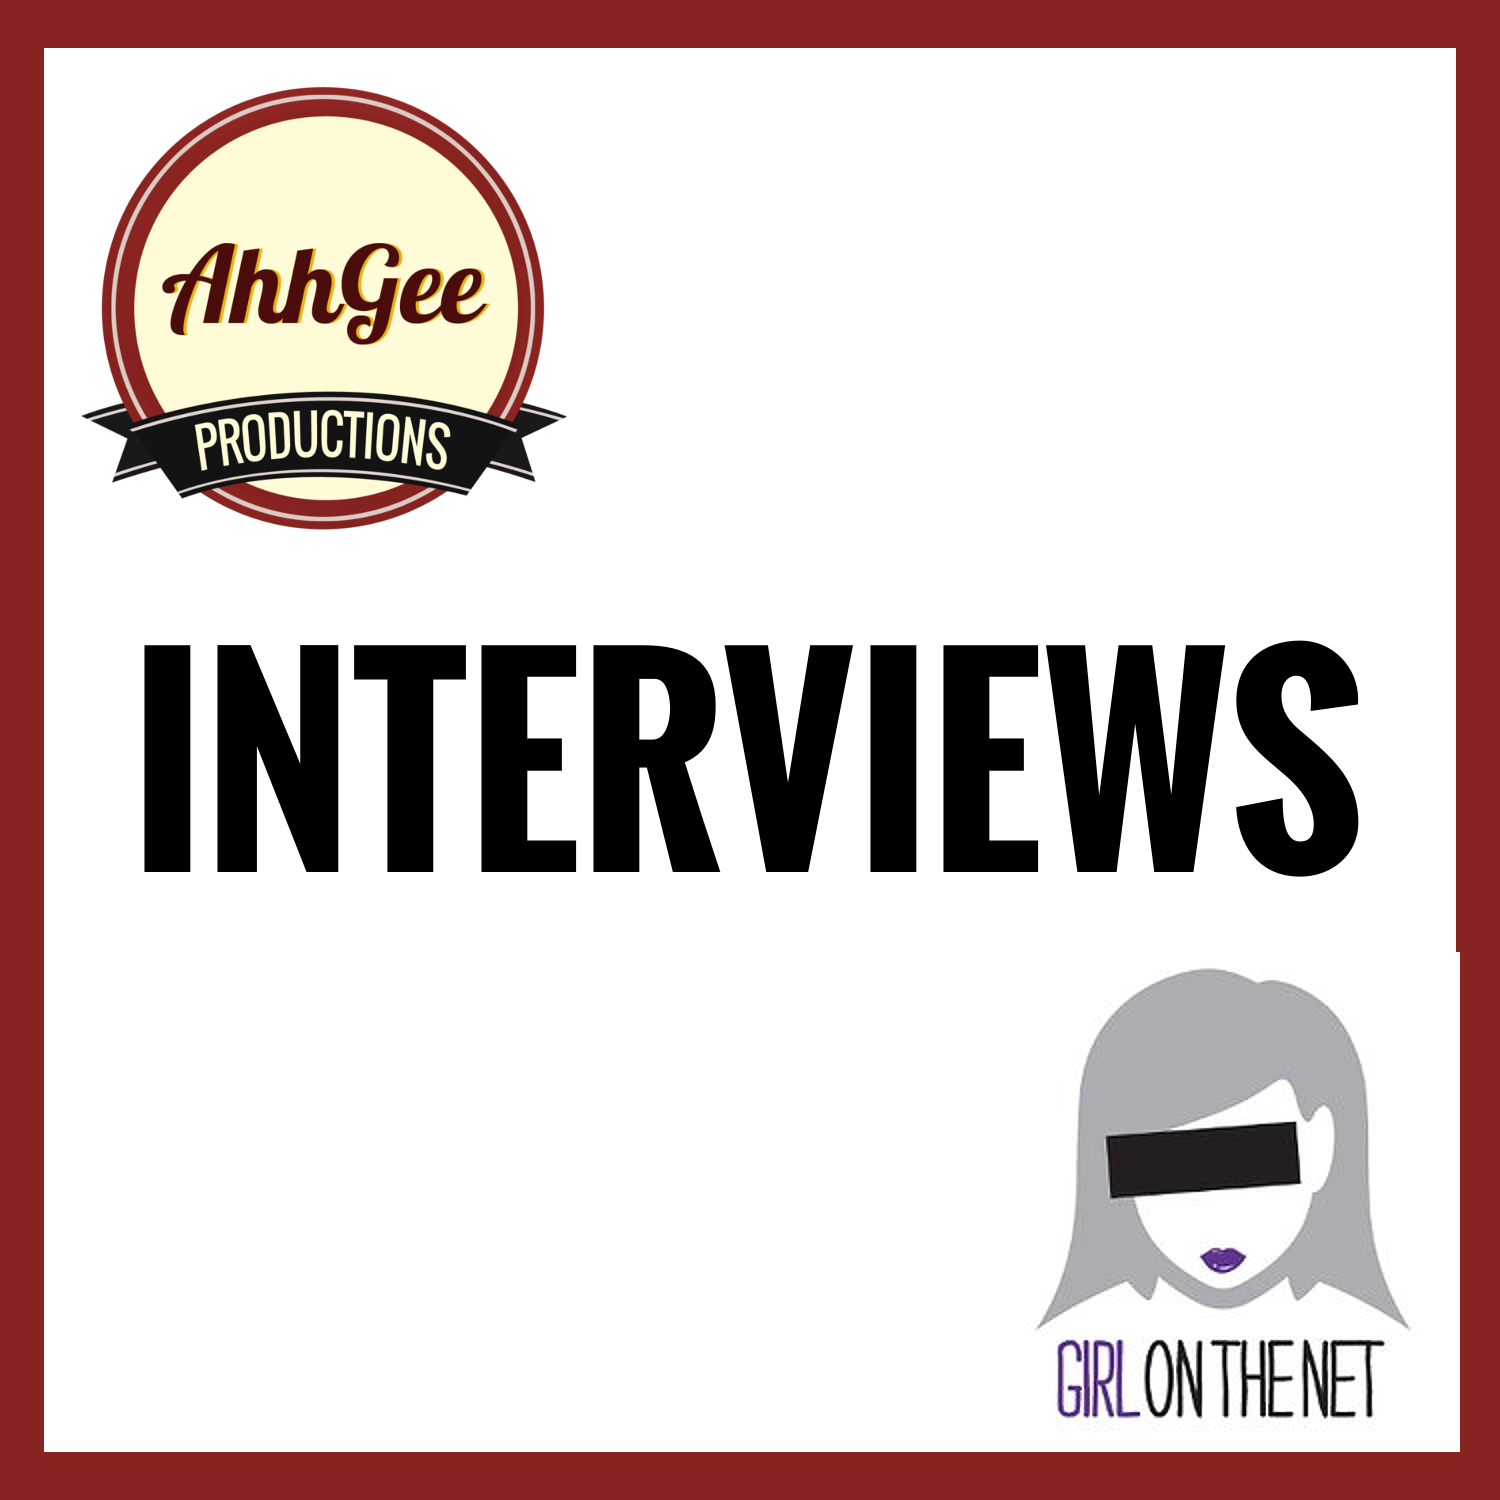 AhhGee Interviews: Girl On The Net